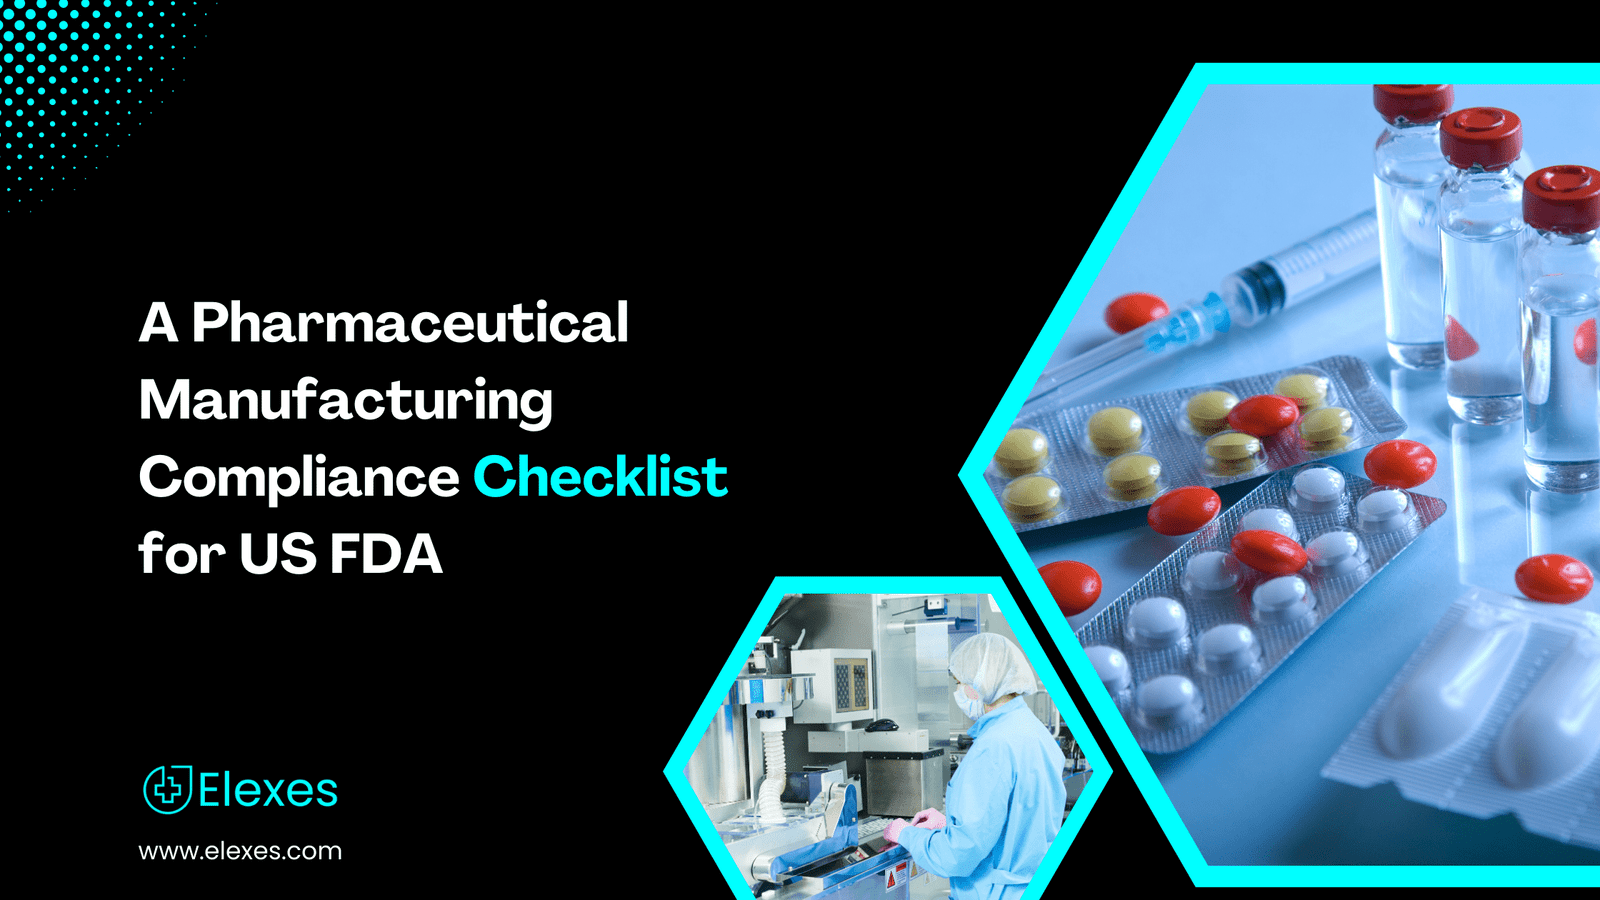 A pharmaceutical manufacturing compliance checklist for US companies